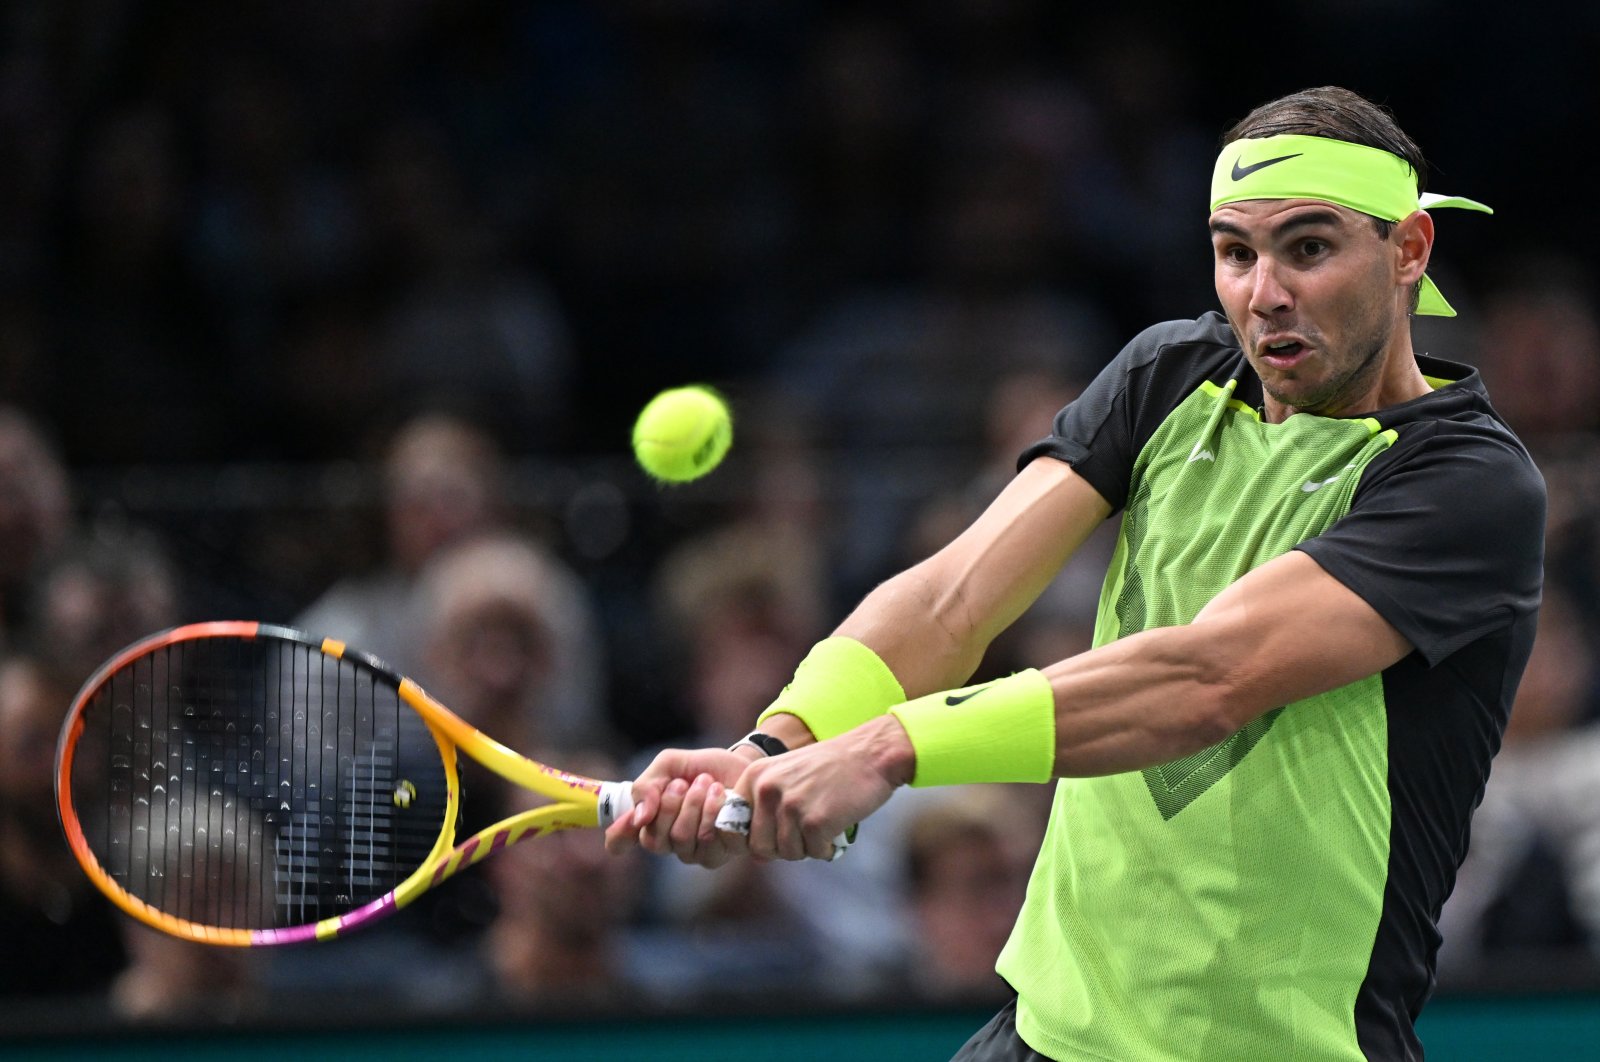 Spain&#039;s Rafael Nadal plays a backhand return during the men&#039;s singles round of 16 tennis match against U.S.&#039; Paul Tommy on day three of the ATP World Tour Masters 1000 - Paris Masters (Paris Bercy) tennis tournament at The AccorHotels Arena, Paris, France, Nov. 2, 2022. (AFP)